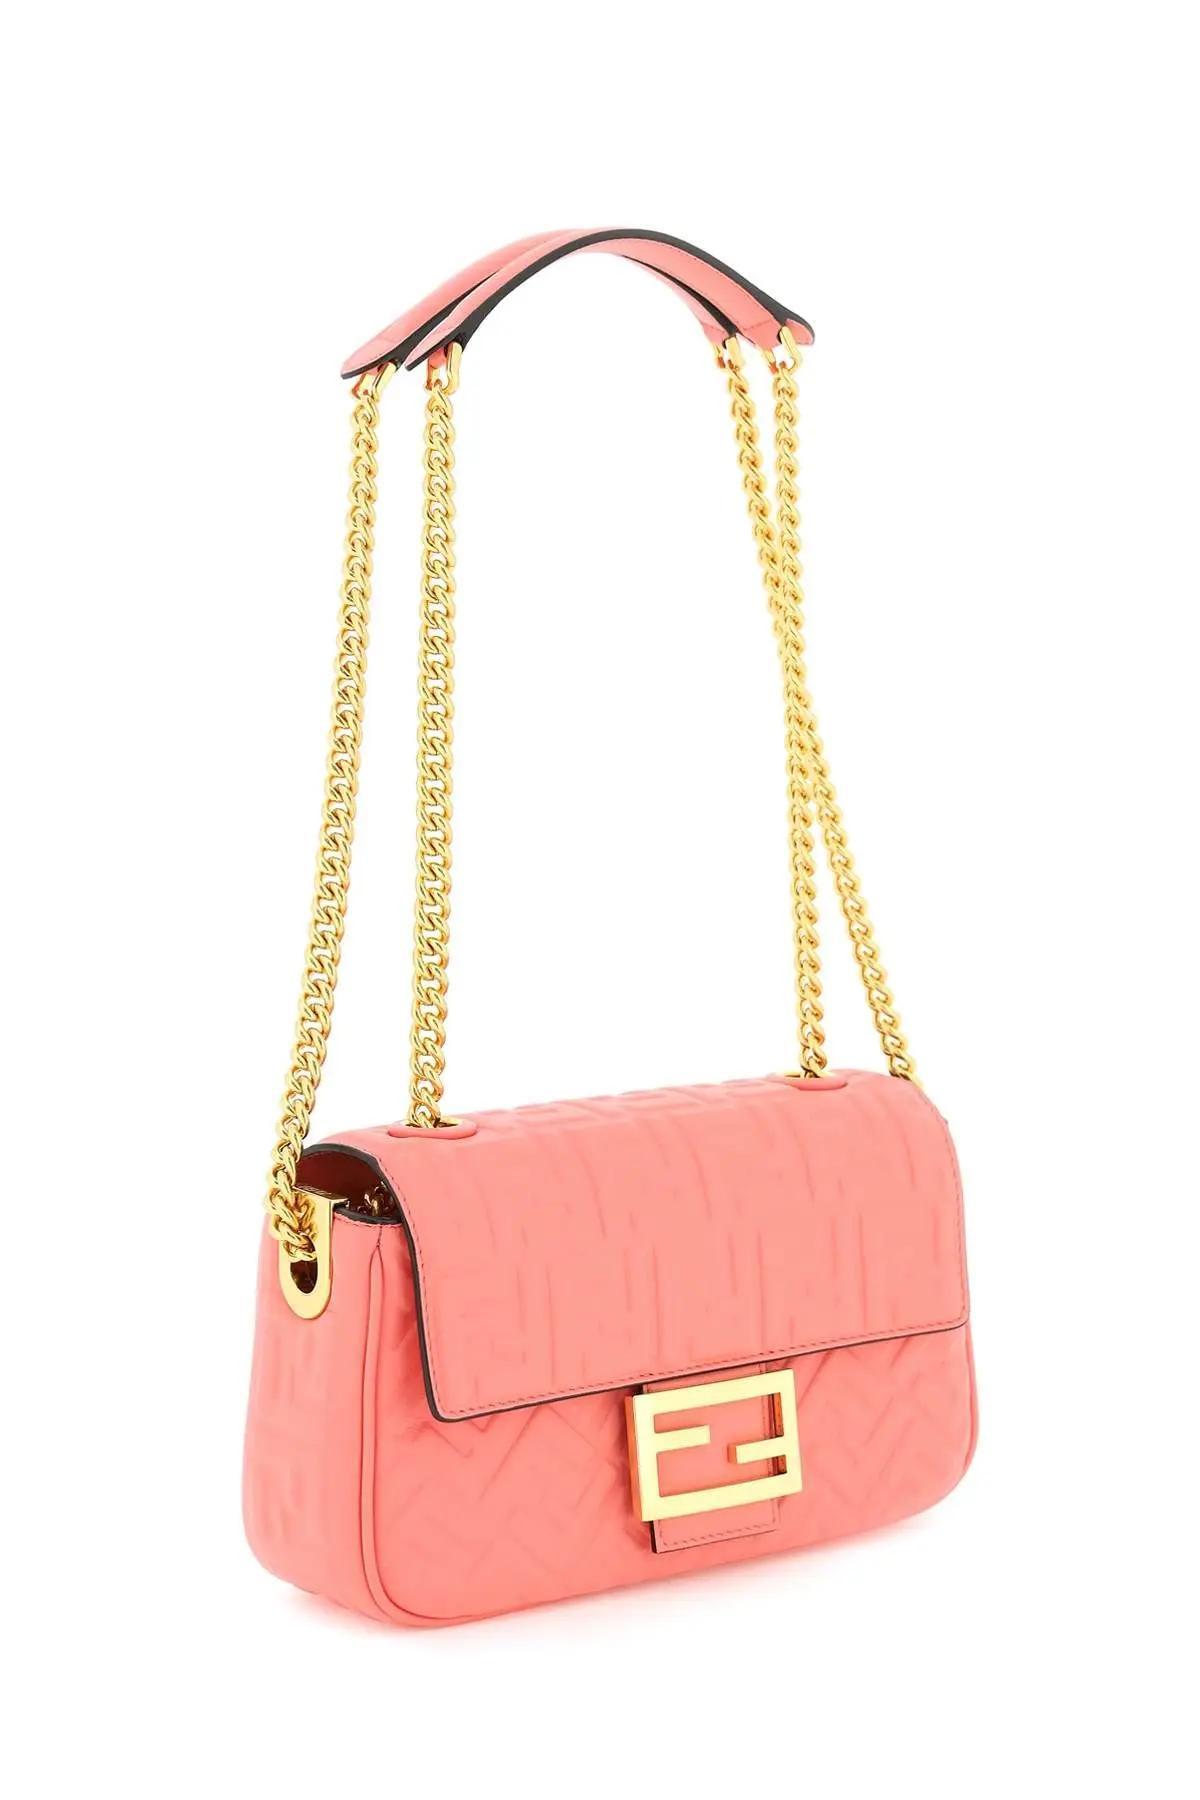 Baguette Chain Midi - Pale pink leather bag